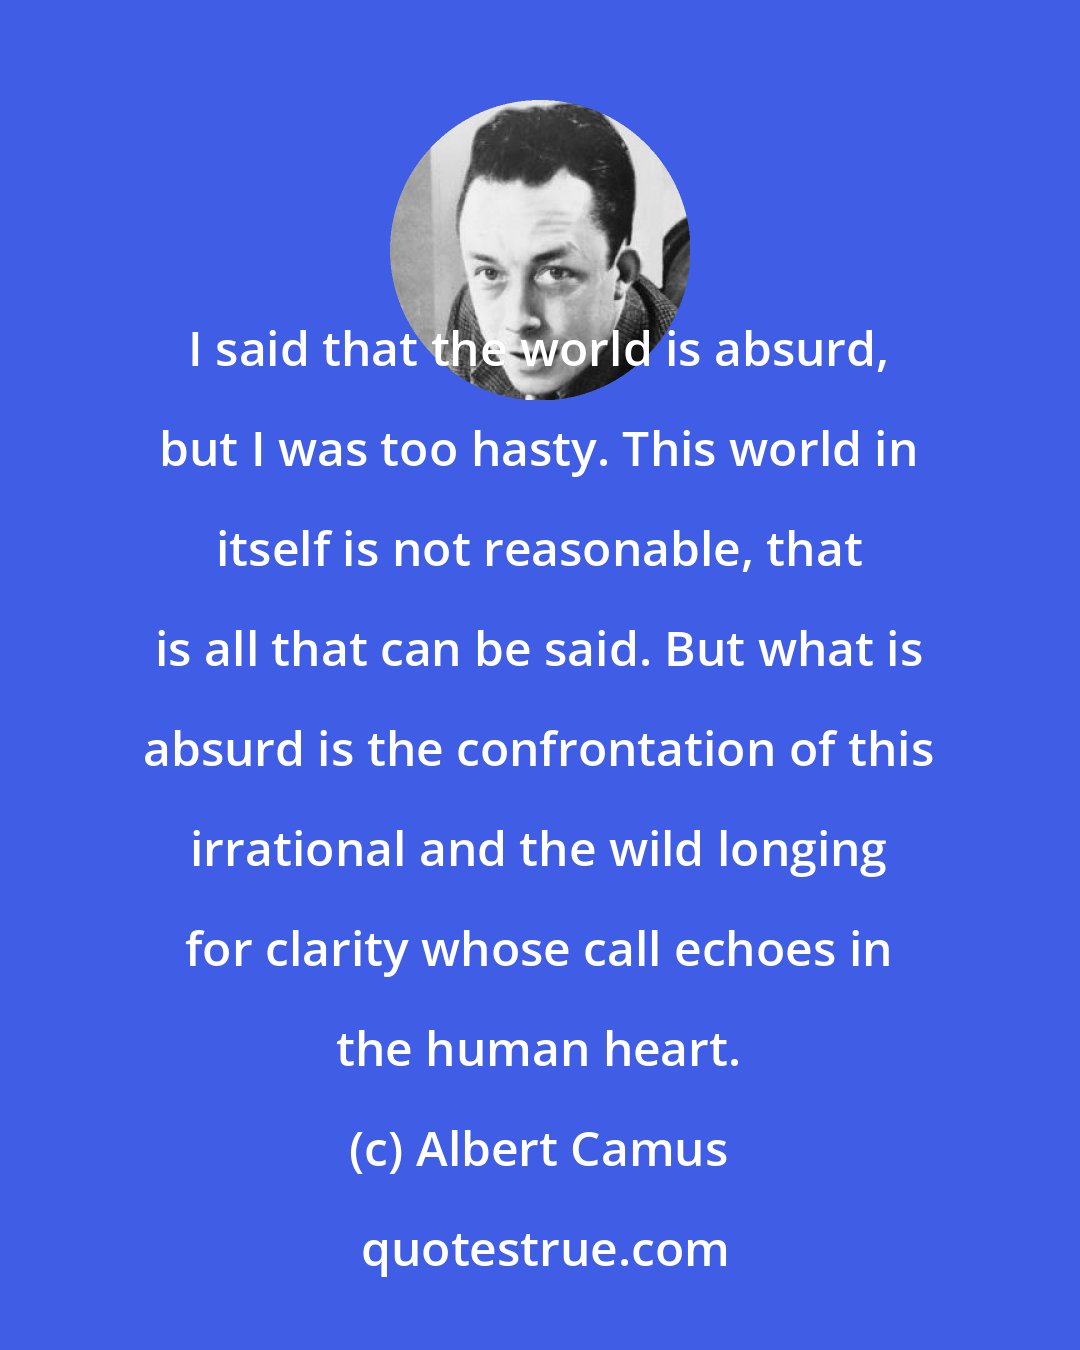 Albert Camus: I said that the world is absurd, but I was too hasty. This world in itself is not reasonable, that is all that can be said. But what is absurd is the confrontation of this irrational and the wild longing for clarity whose call echoes in the human heart.